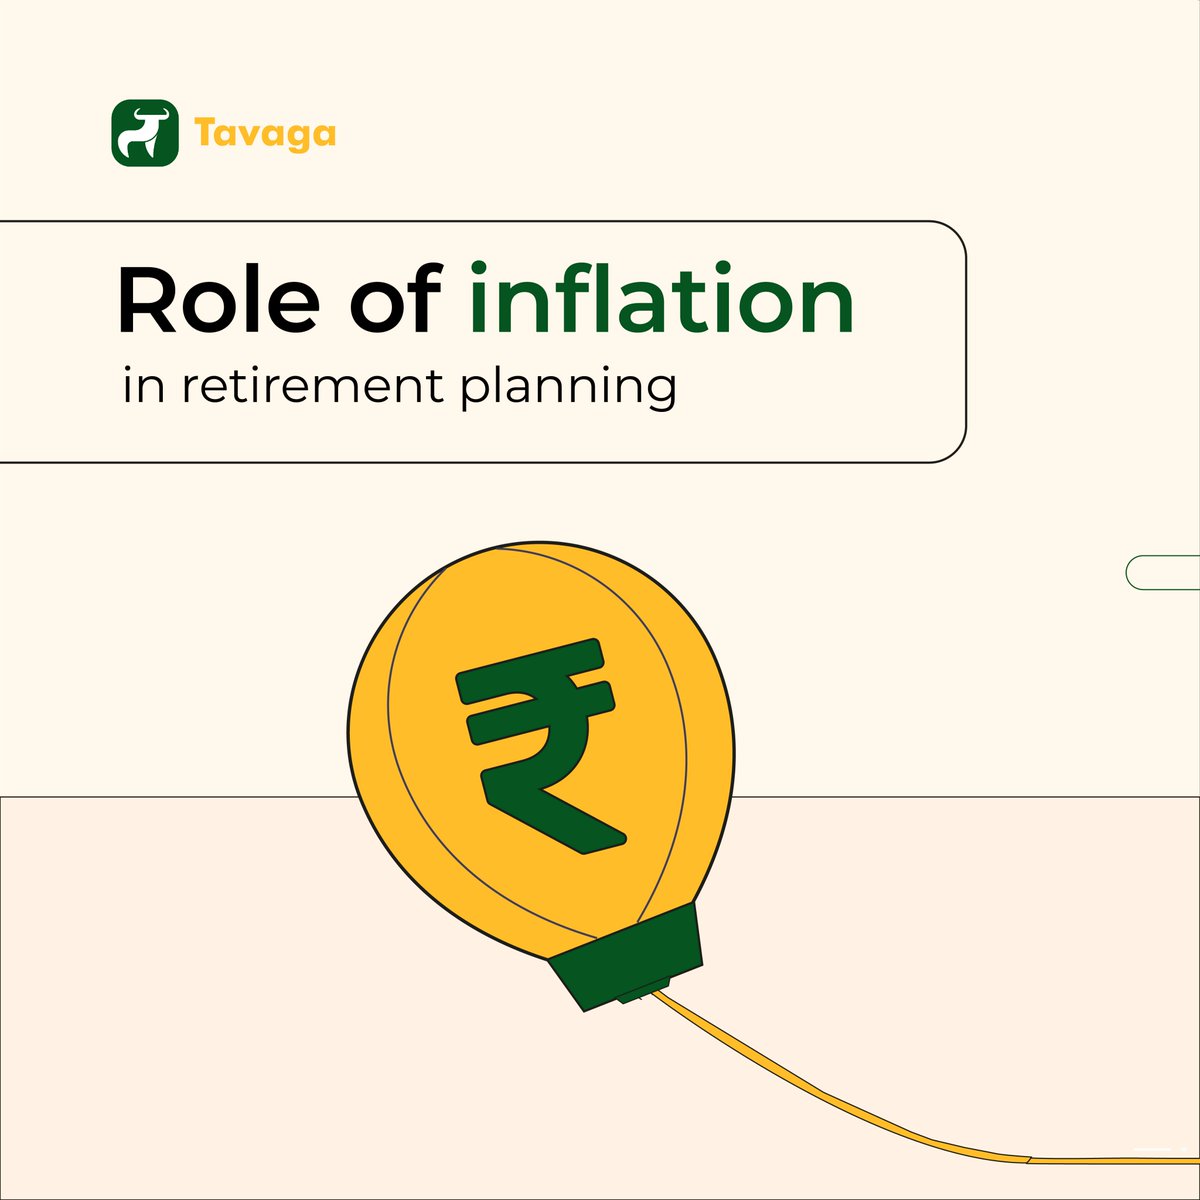 Retirement planning is tough. Inflation makes it tougher. 🧵A Thread #hyperinflation #trader #banknifty #financemajor #stockmarketcrash #moneyfocus #PensionsCrisis